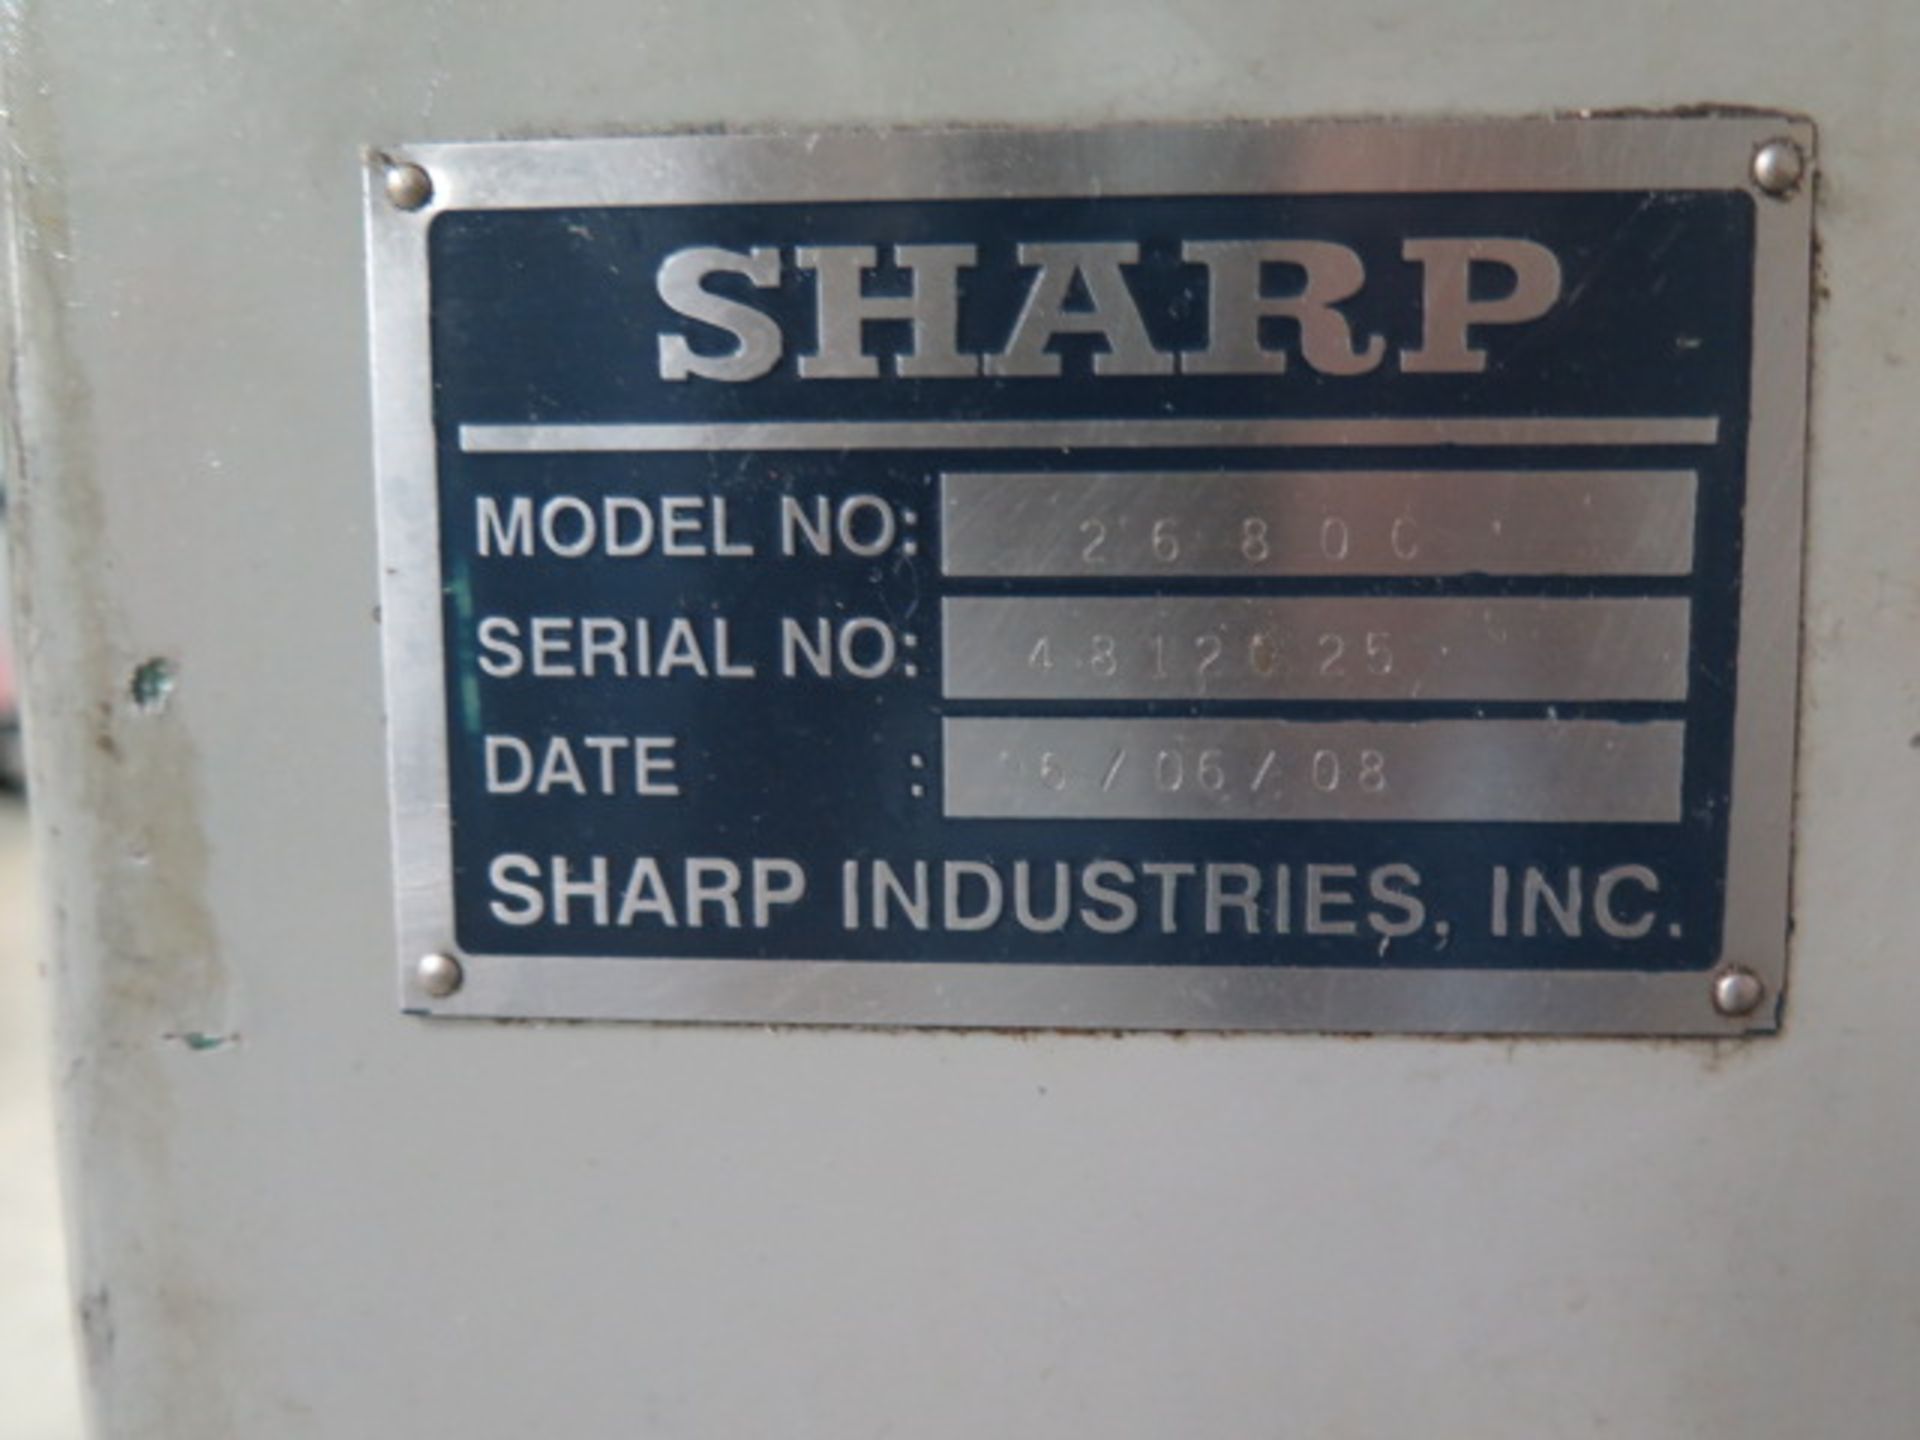 1996 Sharp 2680C 26” x 80” Geared Head – Gap Bed Lathe s/n 4812025 w/ 15-1500 RPM, SOLD AS IS - Image 17 of 17